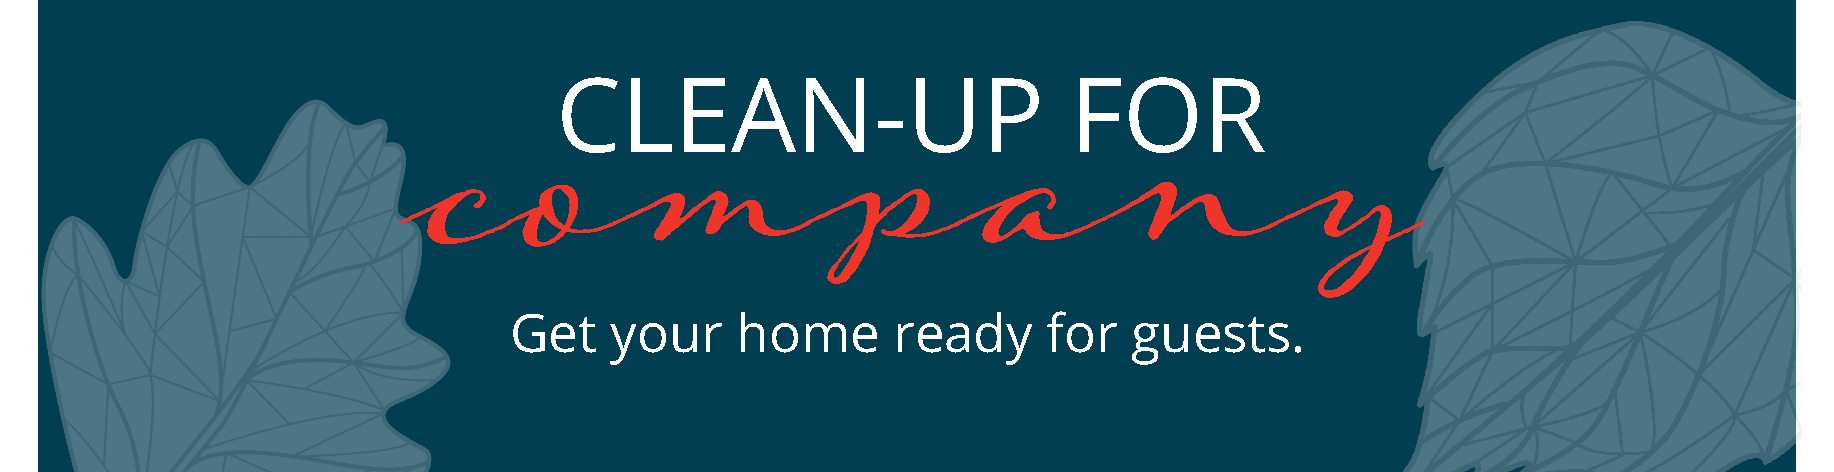 Clean-up for company | Get your home ready for guests.